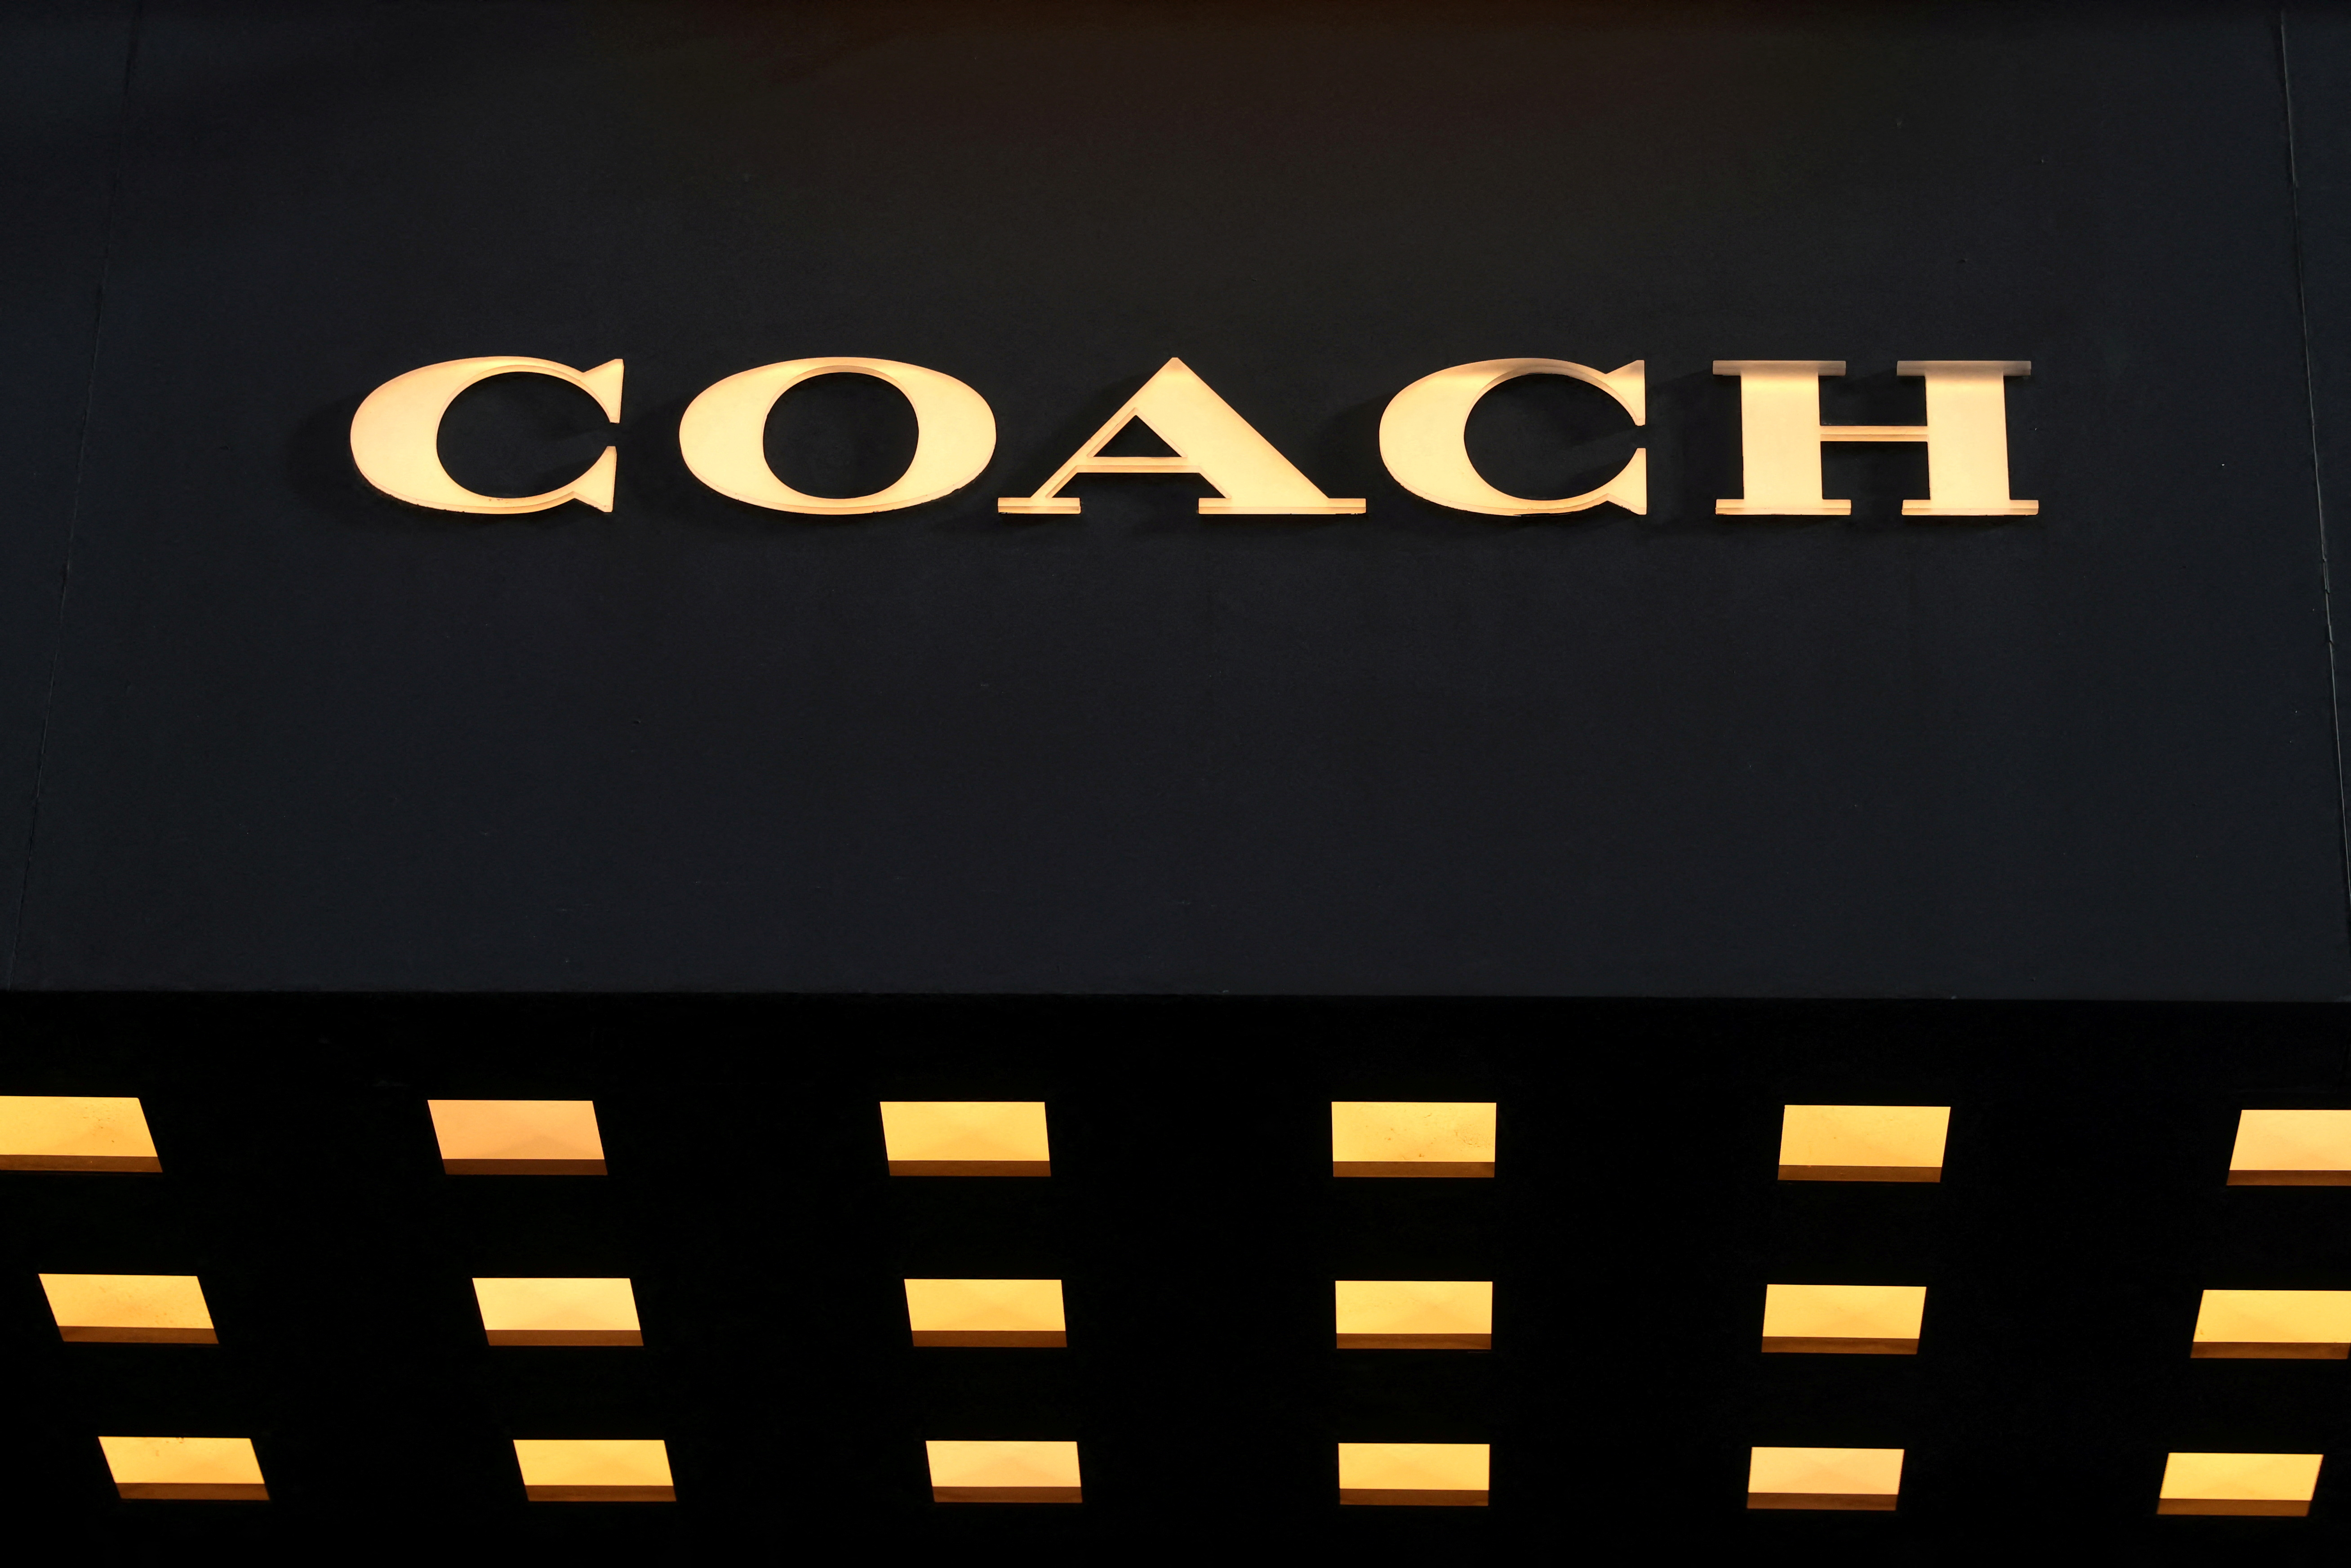 Tapestry slashes deals, adds staff - and now the Coach owner could be back